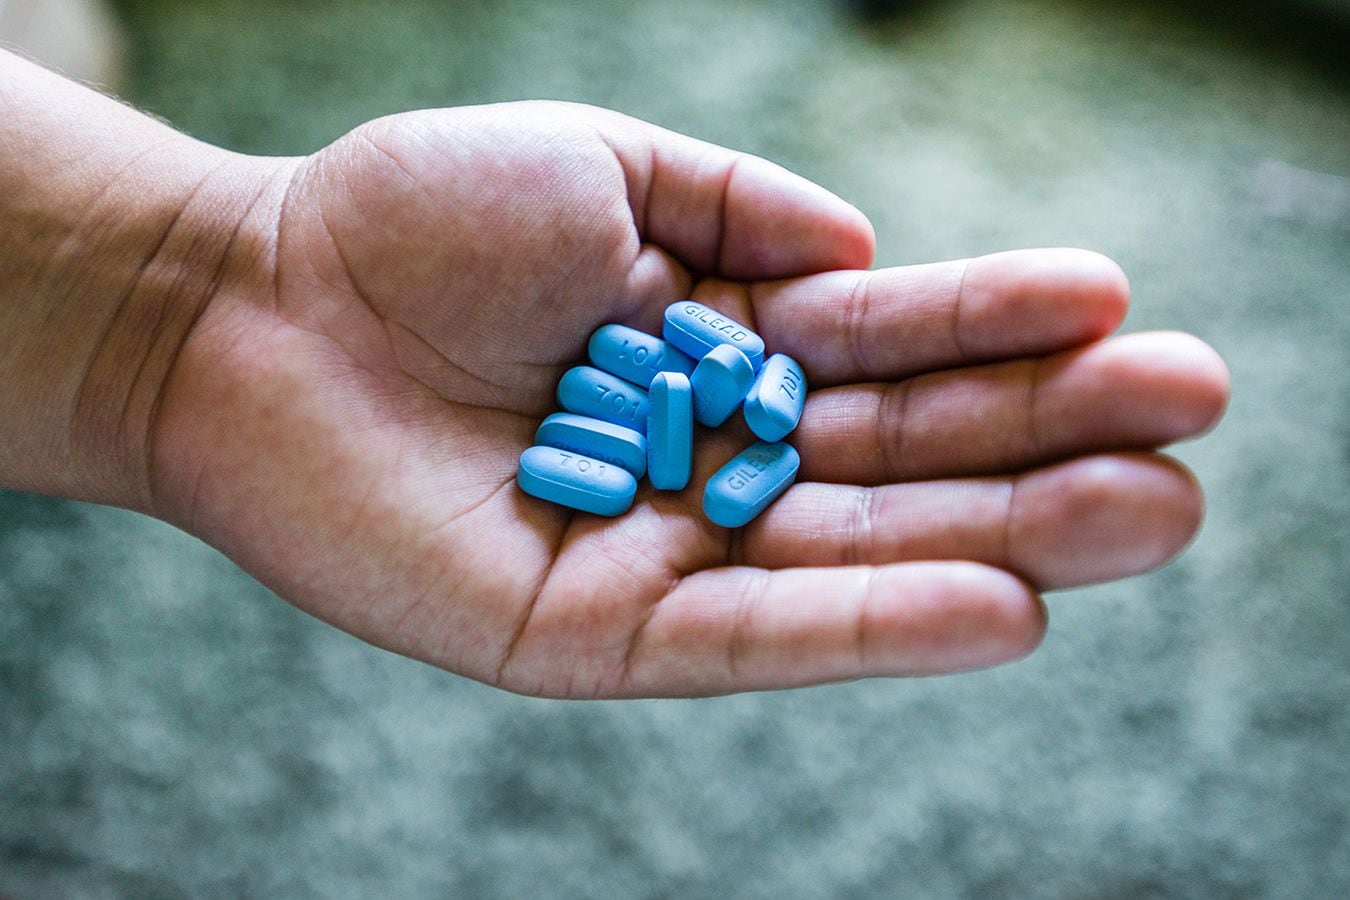 Truvada is one type of PrEP, or pre-exposure prophylaxis, medication used to prevent HIV...